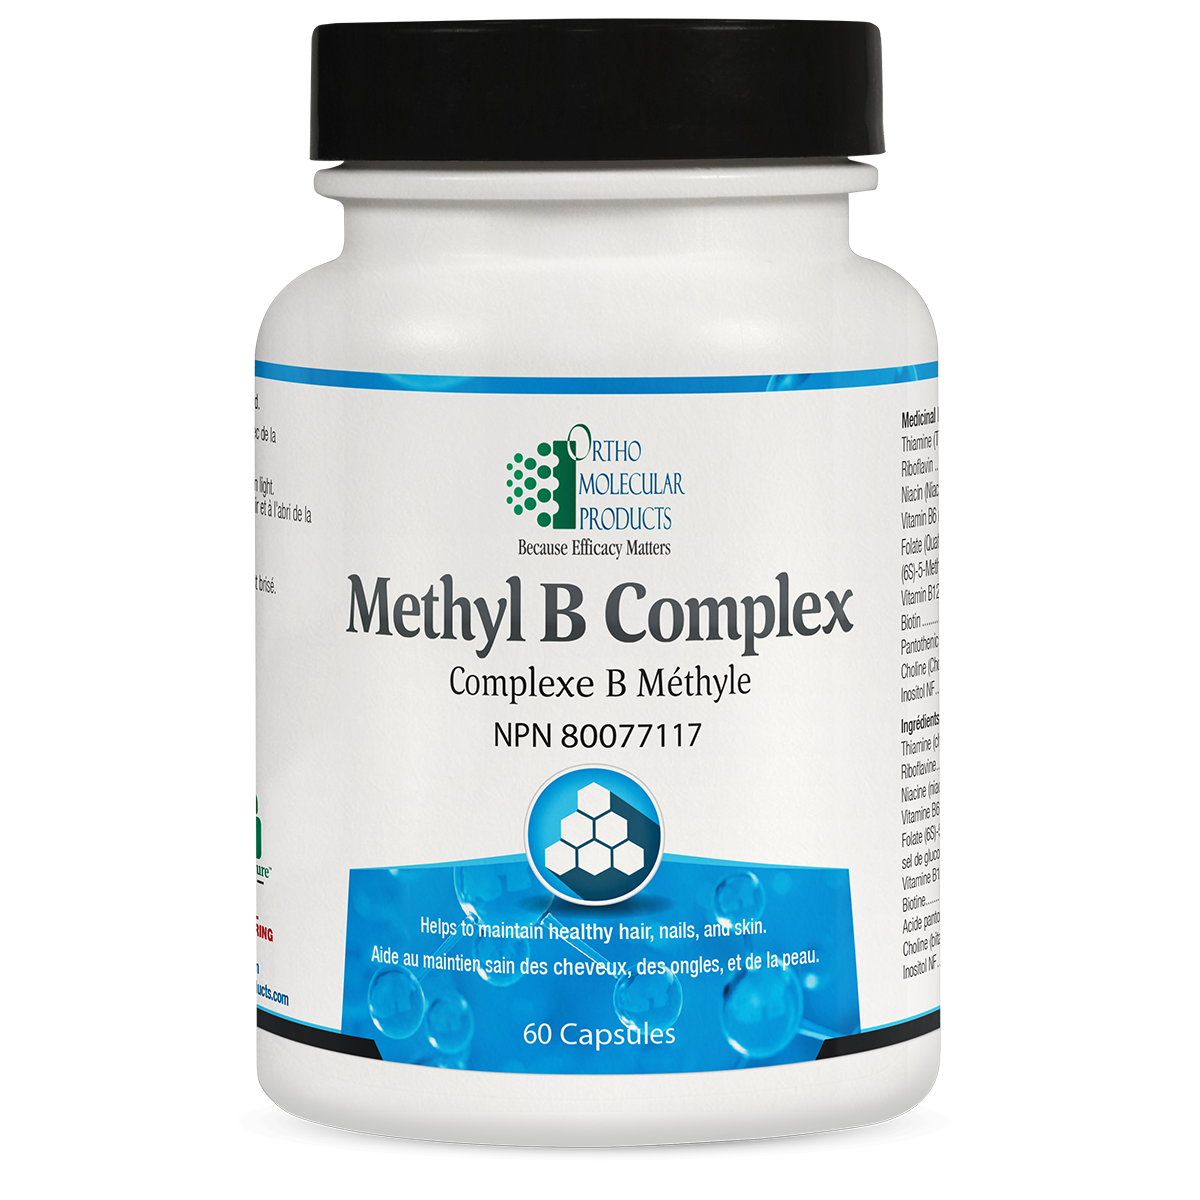 https://orthomolecularproducts.ca/images/canadalibraries/products/essential/360-60-methyl-b-complex-canada-web.png?sfvrsn=1b05c7f4_2